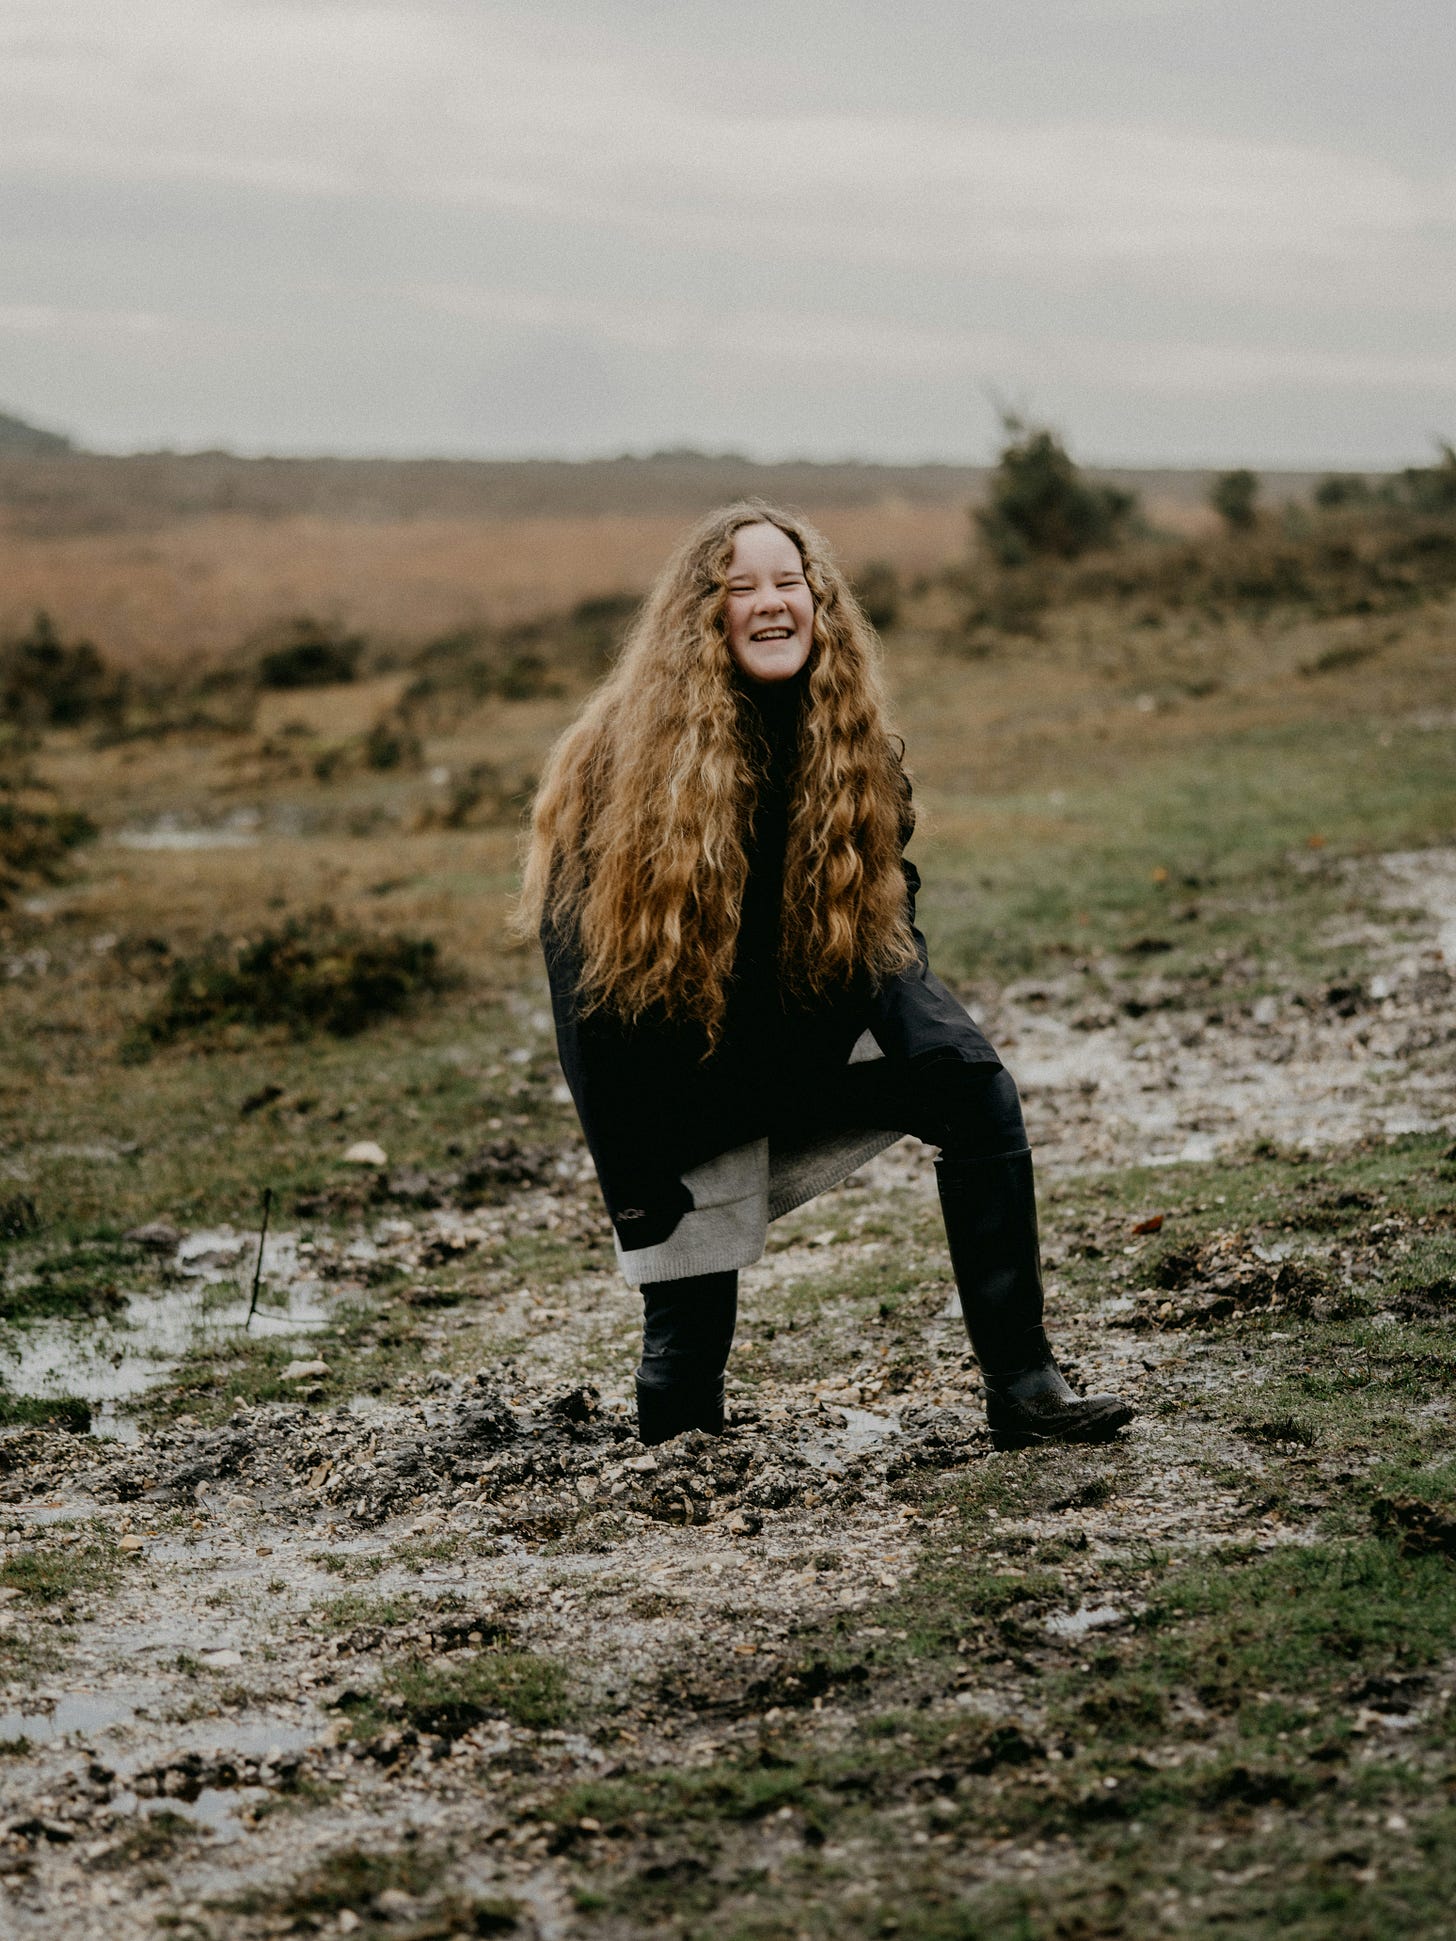 A young person with long, curly hair traversing an unending field during what may be Springtime, as the ground is quite wet. One of their feet is stuck in the mud. They smile, as though mid-laugh and look at the camera.